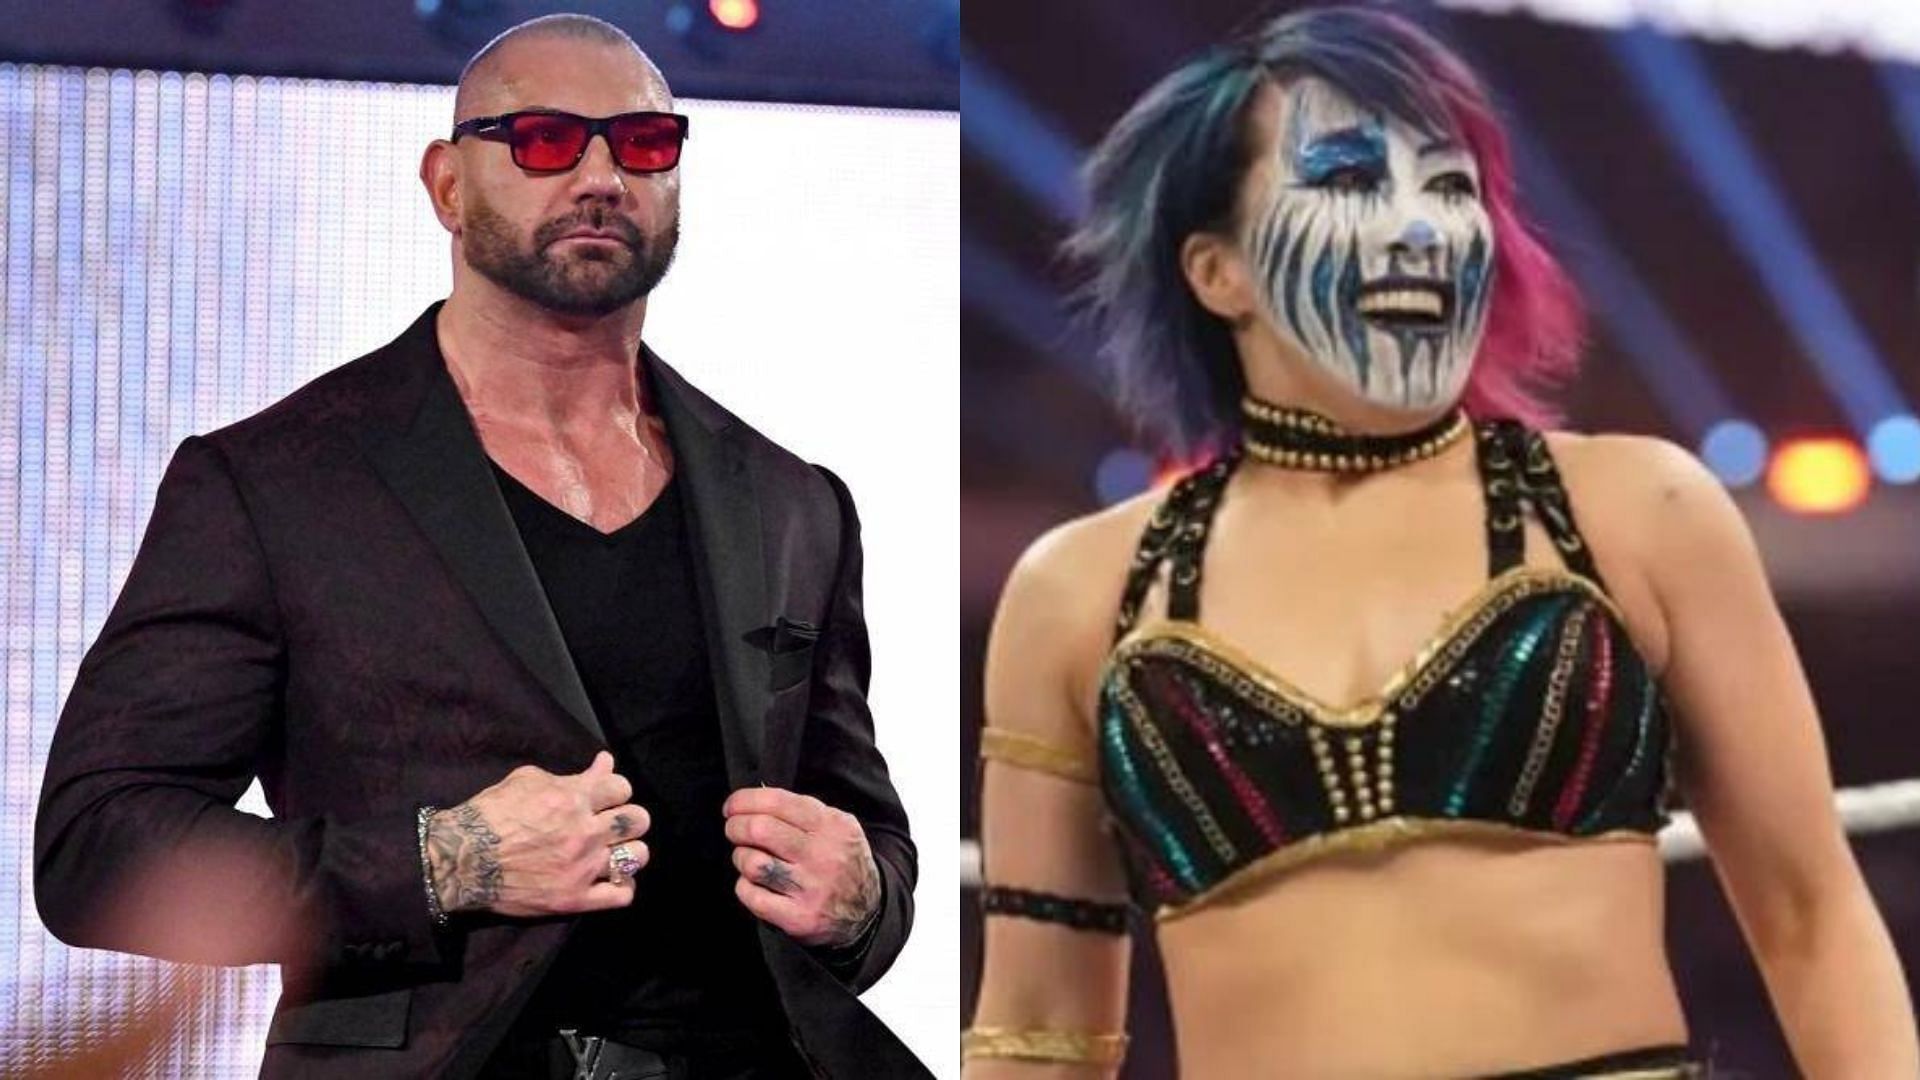 Batista reacted to a clip featuring him and Asuka